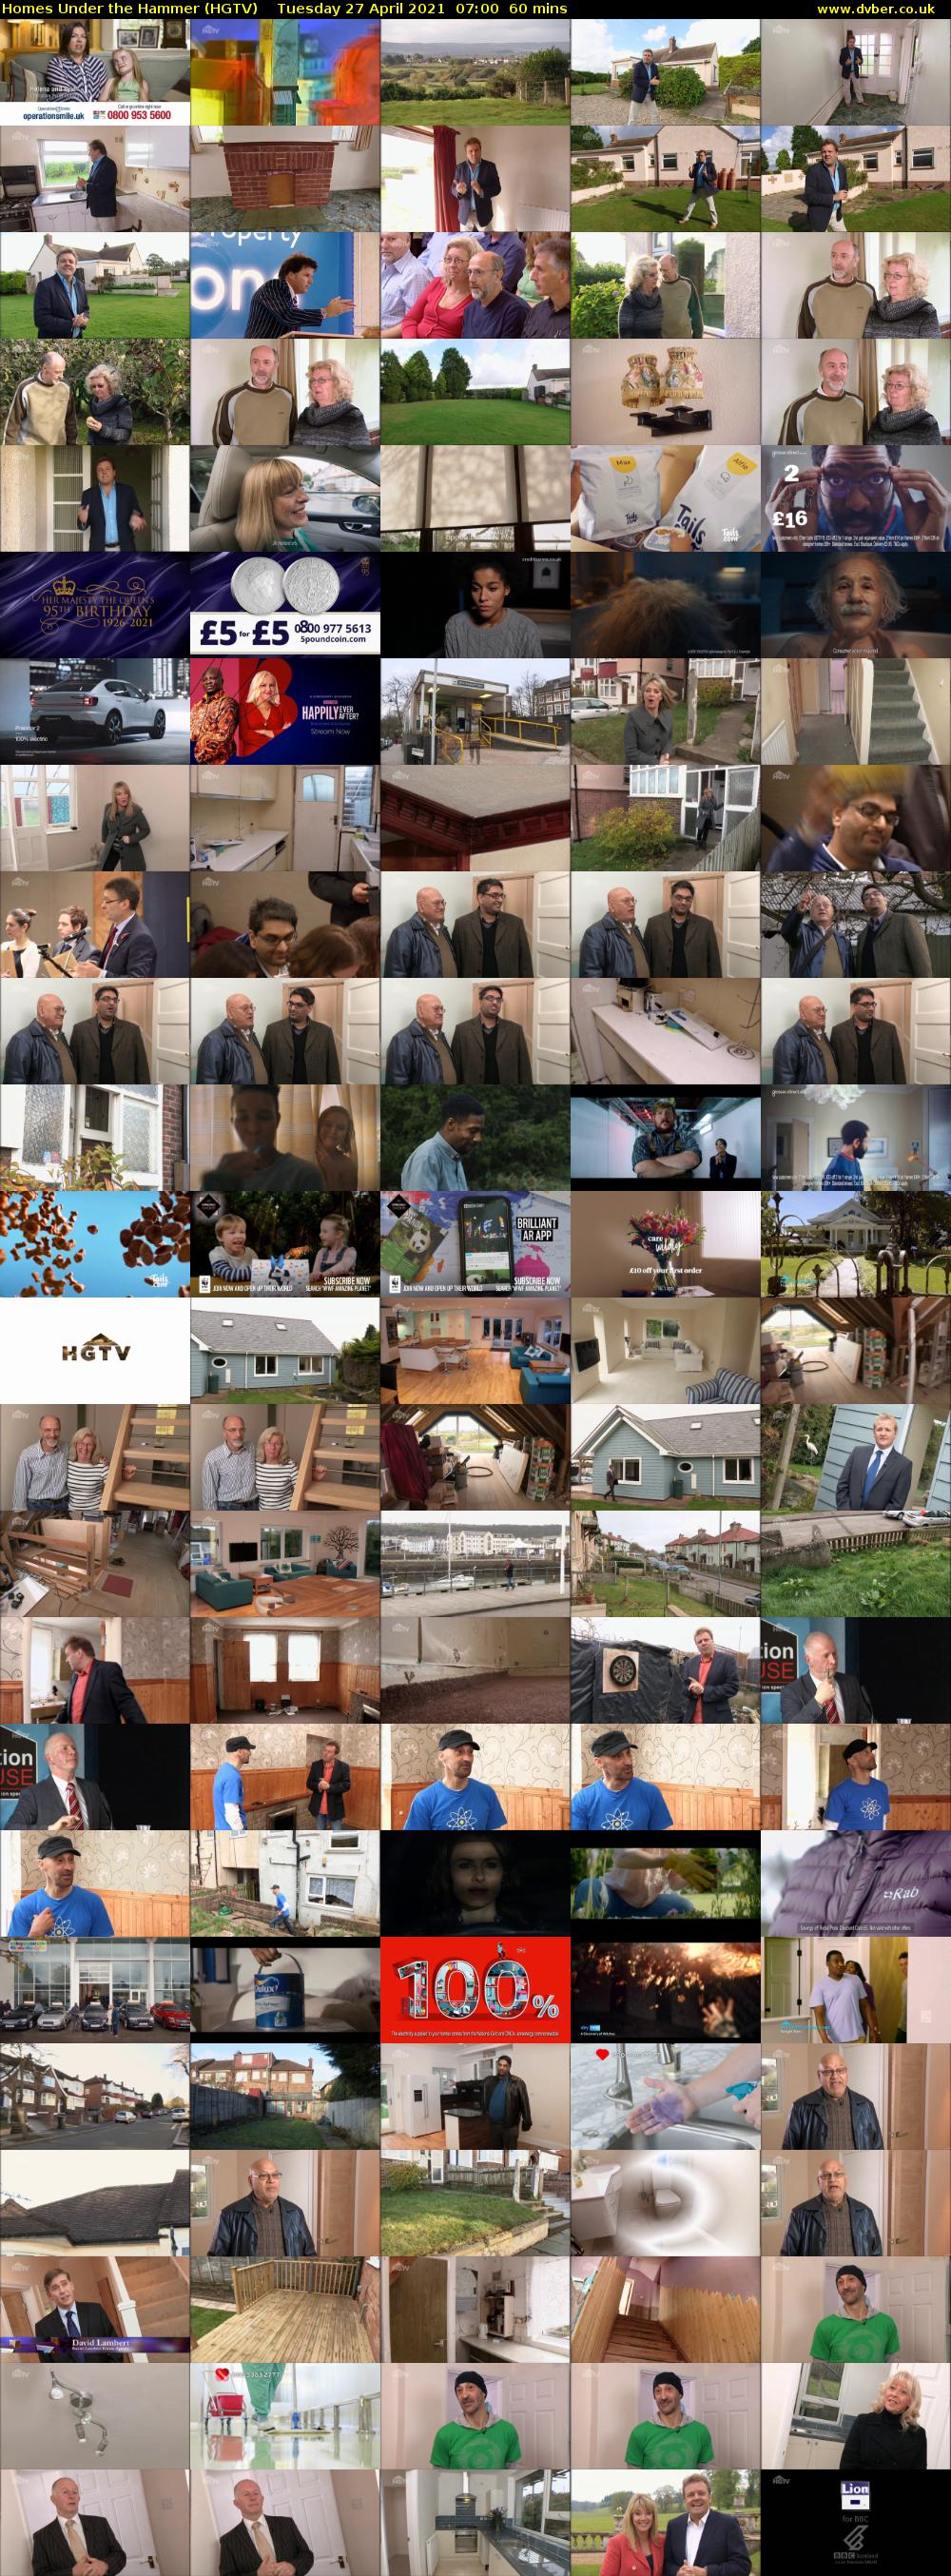 Homes Under the Hammer (HGTV) Tuesday 27 April 2021 07:00 - 08:00